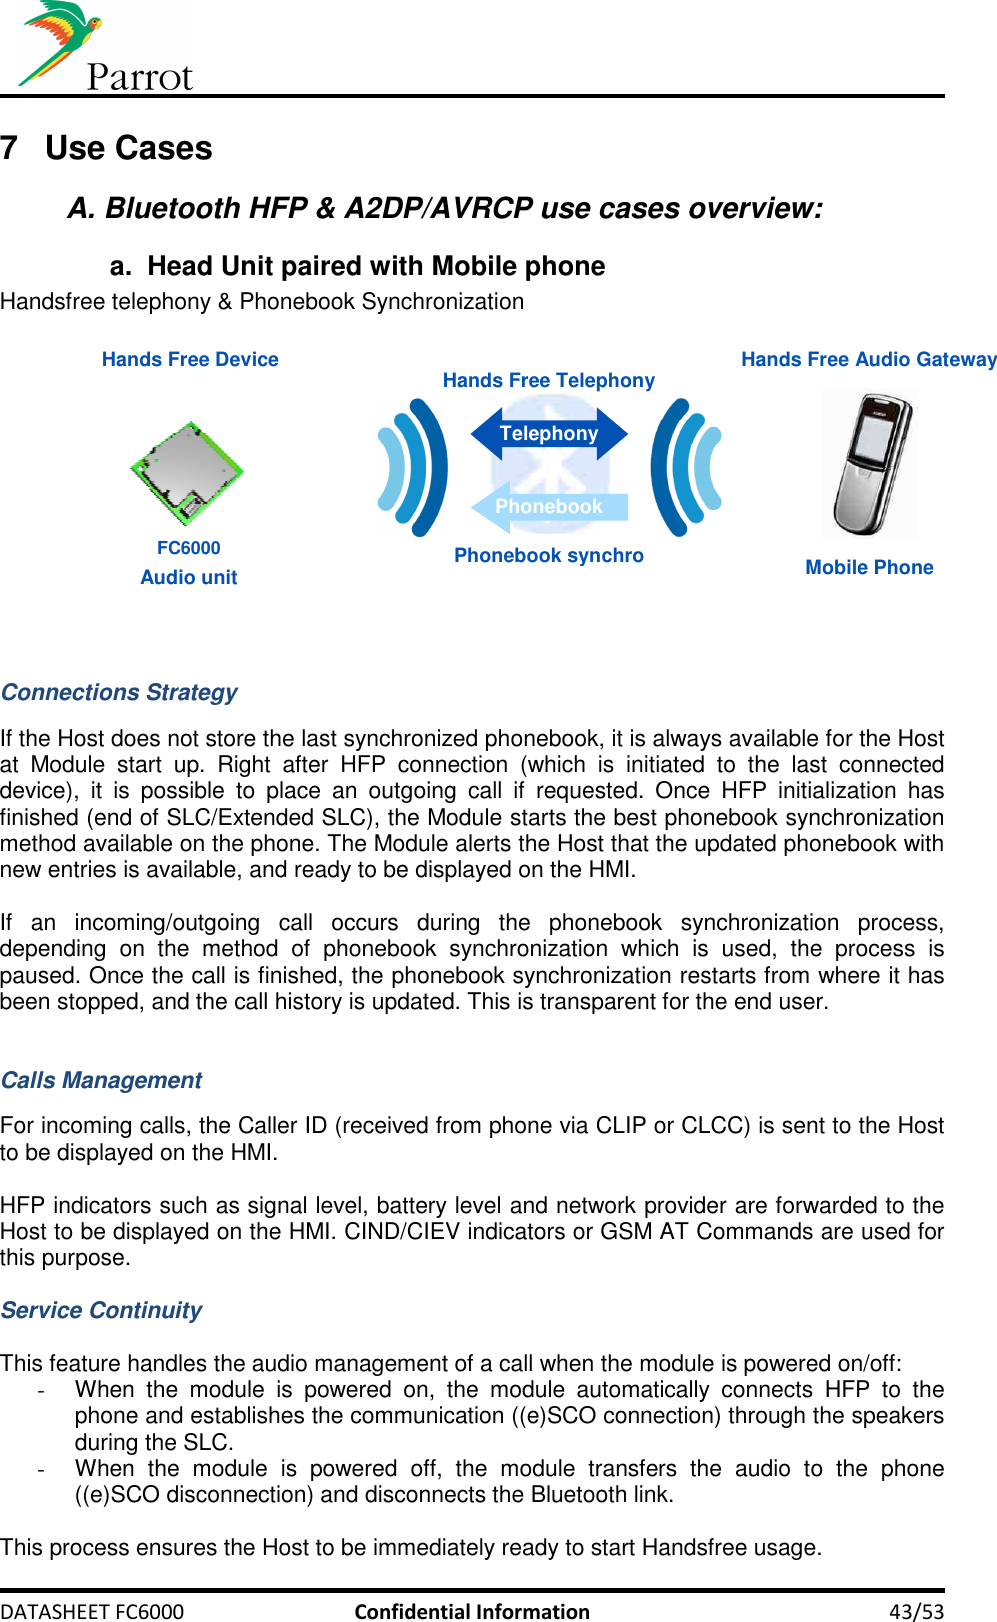     DATASHEET FC6000  Confidential Information  43/53 7  Use Cases A. Bluetooth HFP &amp; A2DP/AVRCP use cases overview: a.  Head Unit paired with Mobile phone  Handsfree telephony &amp; Phonebook Synchronization   Hands Free Audio Gateway Hands Free DeviceMobile PhoneAudio unitHands Free TelephonyTelephonyPhonebookPhonebook synchroFC6000   Connections Strategy  If the Host does not store the last synchronized phonebook, it is always available for the Host at  Module  start  up.  Right  after  HFP  connection  (which  is  initiated  to  the  last  connected device),  it  is  possible  to  place  an  outgoing  call  if  requested.  Once  HFP  initialization  has finished (end of SLC/Extended SLC), the Module starts the best phonebook synchronization method available on the phone. The Module alerts the Host that the updated phonebook with new entries is available, and ready to be displayed on the HMI.  If  an  incoming/outgoing  call  occurs  during  the  phonebook  synchronization  process, depending  on  the  method  of  phonebook  synchronization  which  is  used,  the  process  is paused. Once the call is finished, the phonebook synchronization restarts from where it has been stopped, and the call history is updated. This is transparent for the end user.   Calls Management  For incoming calls, the Caller ID (received from phone via CLIP or CLCC) is sent to the Host to be displayed on the HMI.  HFP indicators such as signal level, battery level and network provider are forwarded to the Host to be displayed on the HMI. CIND/CIEV indicators or GSM AT Commands are used for this purpose.  Service Continuity  This feature handles the audio management of a call when the module is powered on/off: -  When  the  module  is  powered  on,  the  module  automatically  connects  HFP  to  the phone and establishes the communication ((e)SCO connection) through the speakers during the SLC. -  When  the  module  is  powered  off,  the  module  transfers  the  audio  to  the  phone ((e)SCO disconnection) and disconnects the Bluetooth link.  This process ensures the Host to be immediately ready to start Handsfree usage.  